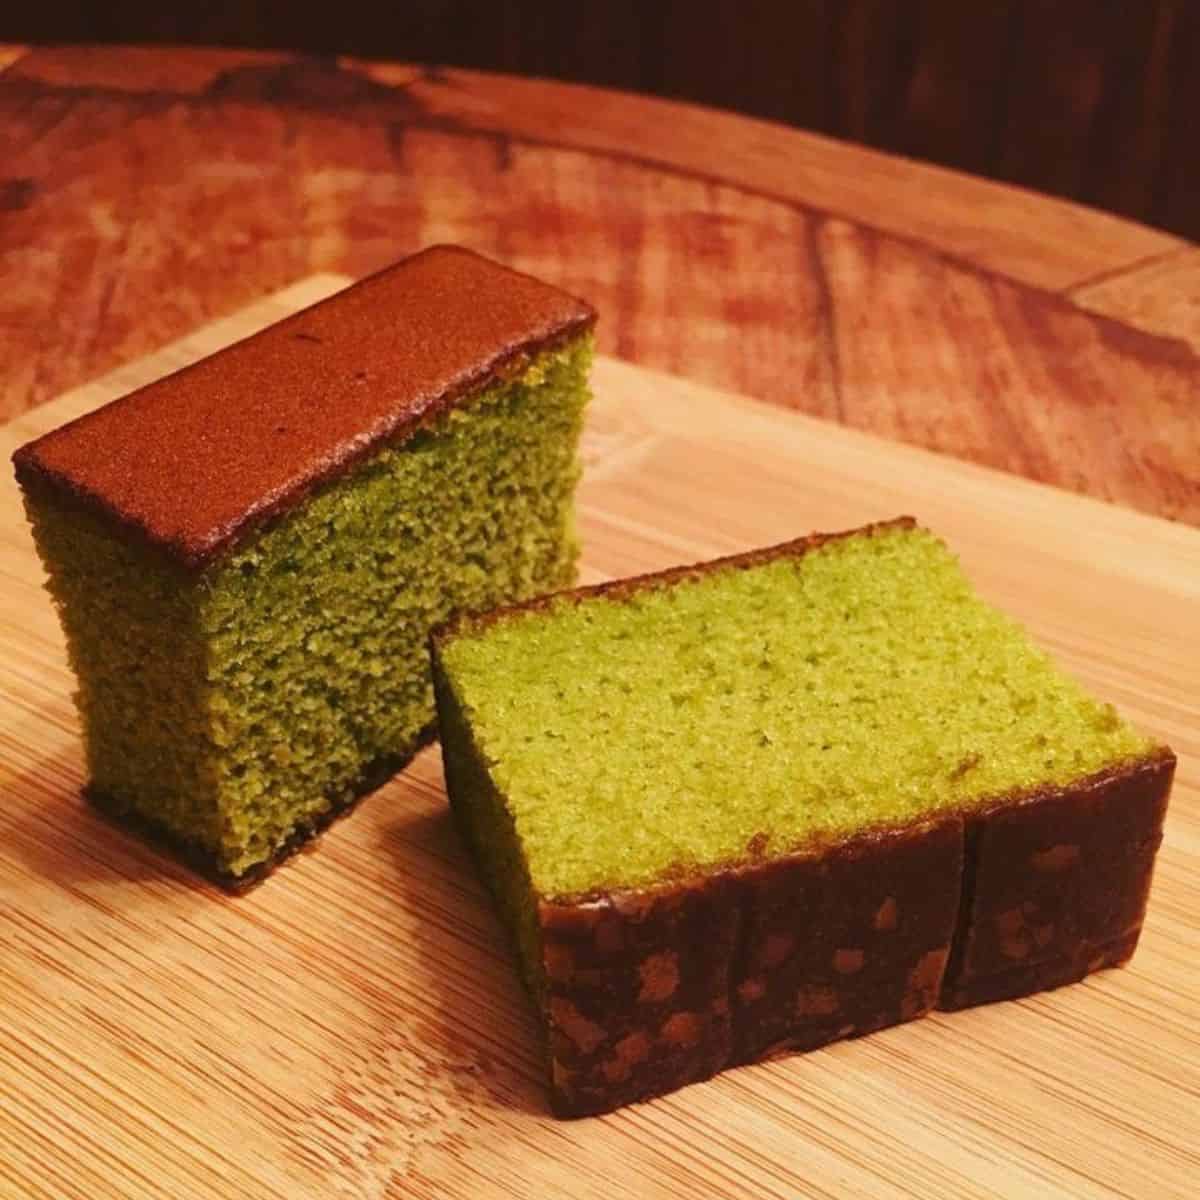 2 slices of matcha cake on a wood board